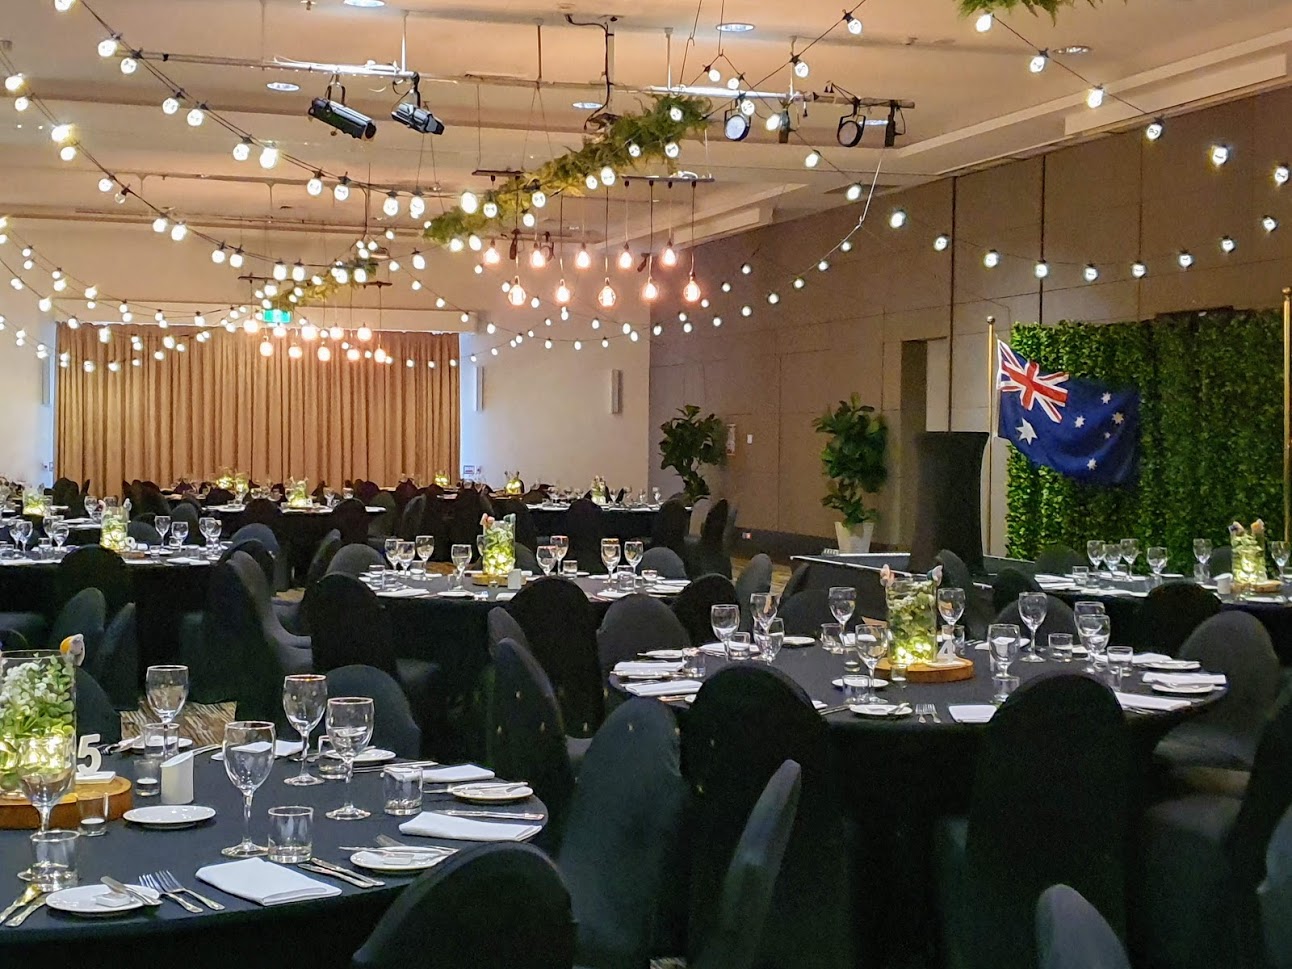 Jetty Harbour Marina Rooms - Marquee ceiling canopy, greenery & Festoon lights, Edison chandeliers, Black chair covers, Table decoration glass vase  battery fairy lights, eucalyptus, babies breath on a timber log- Pacific Bay Resort